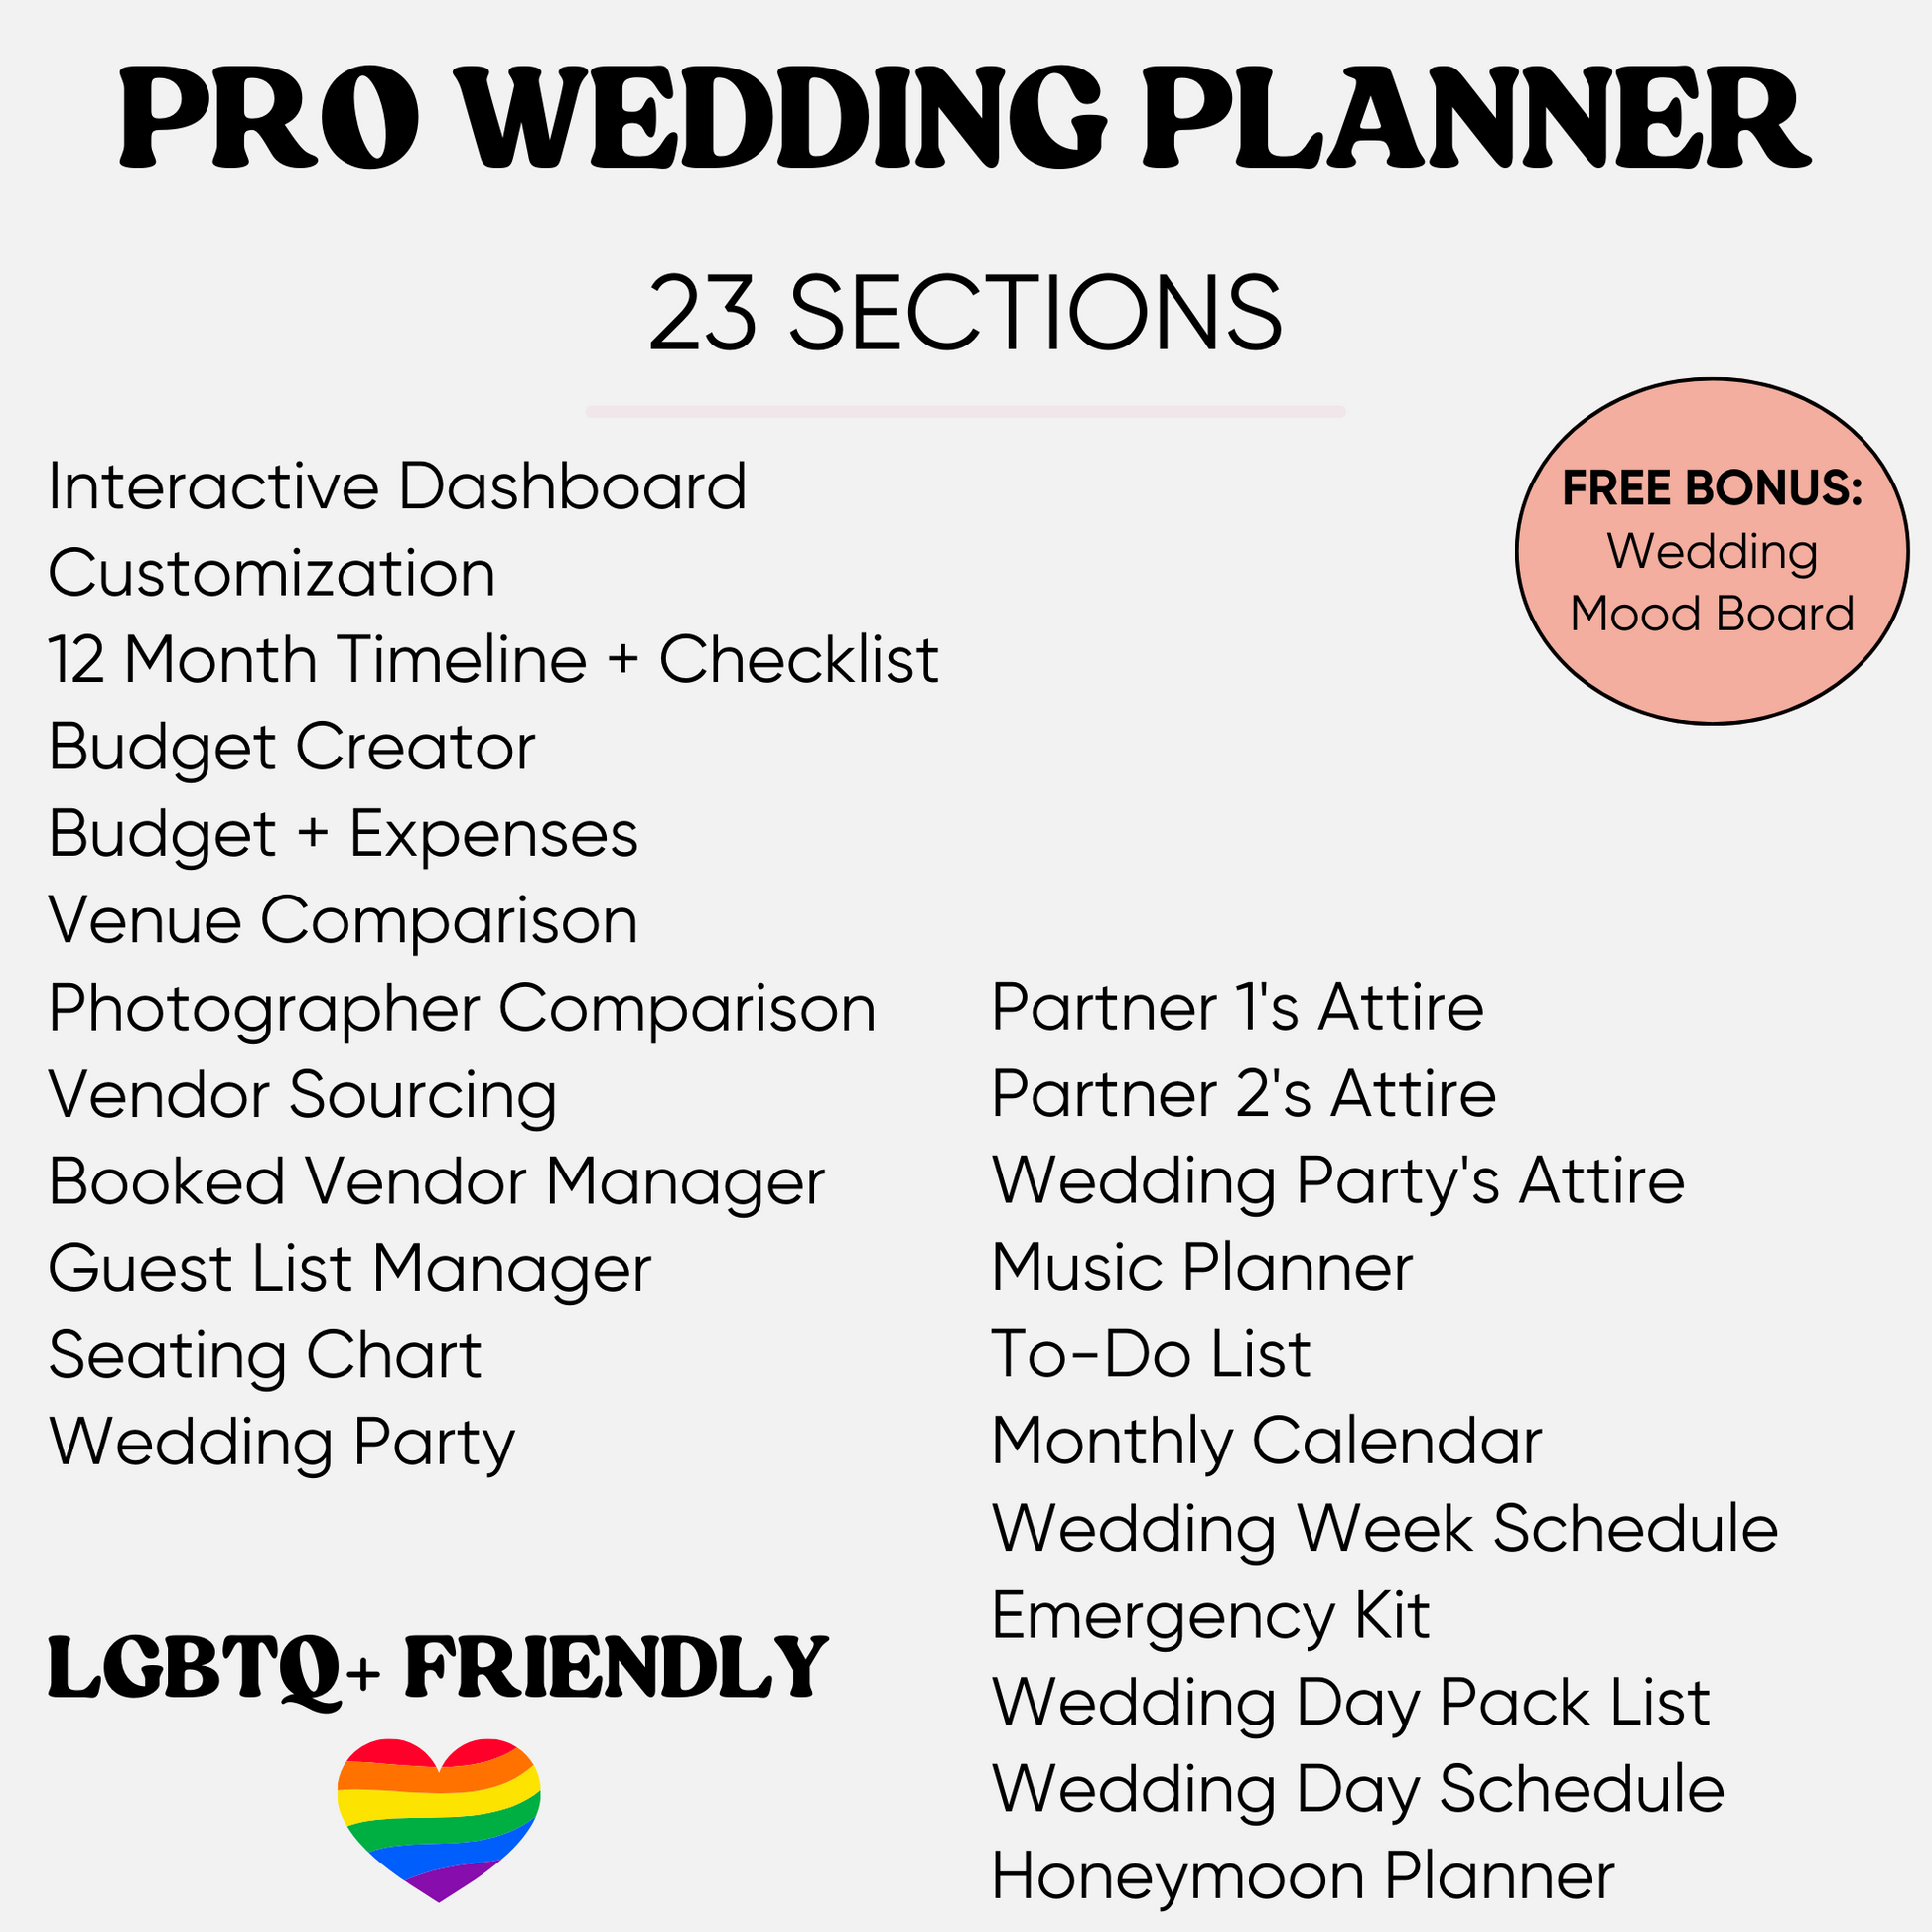 Emergency Kit Checklist for Wedding Planners